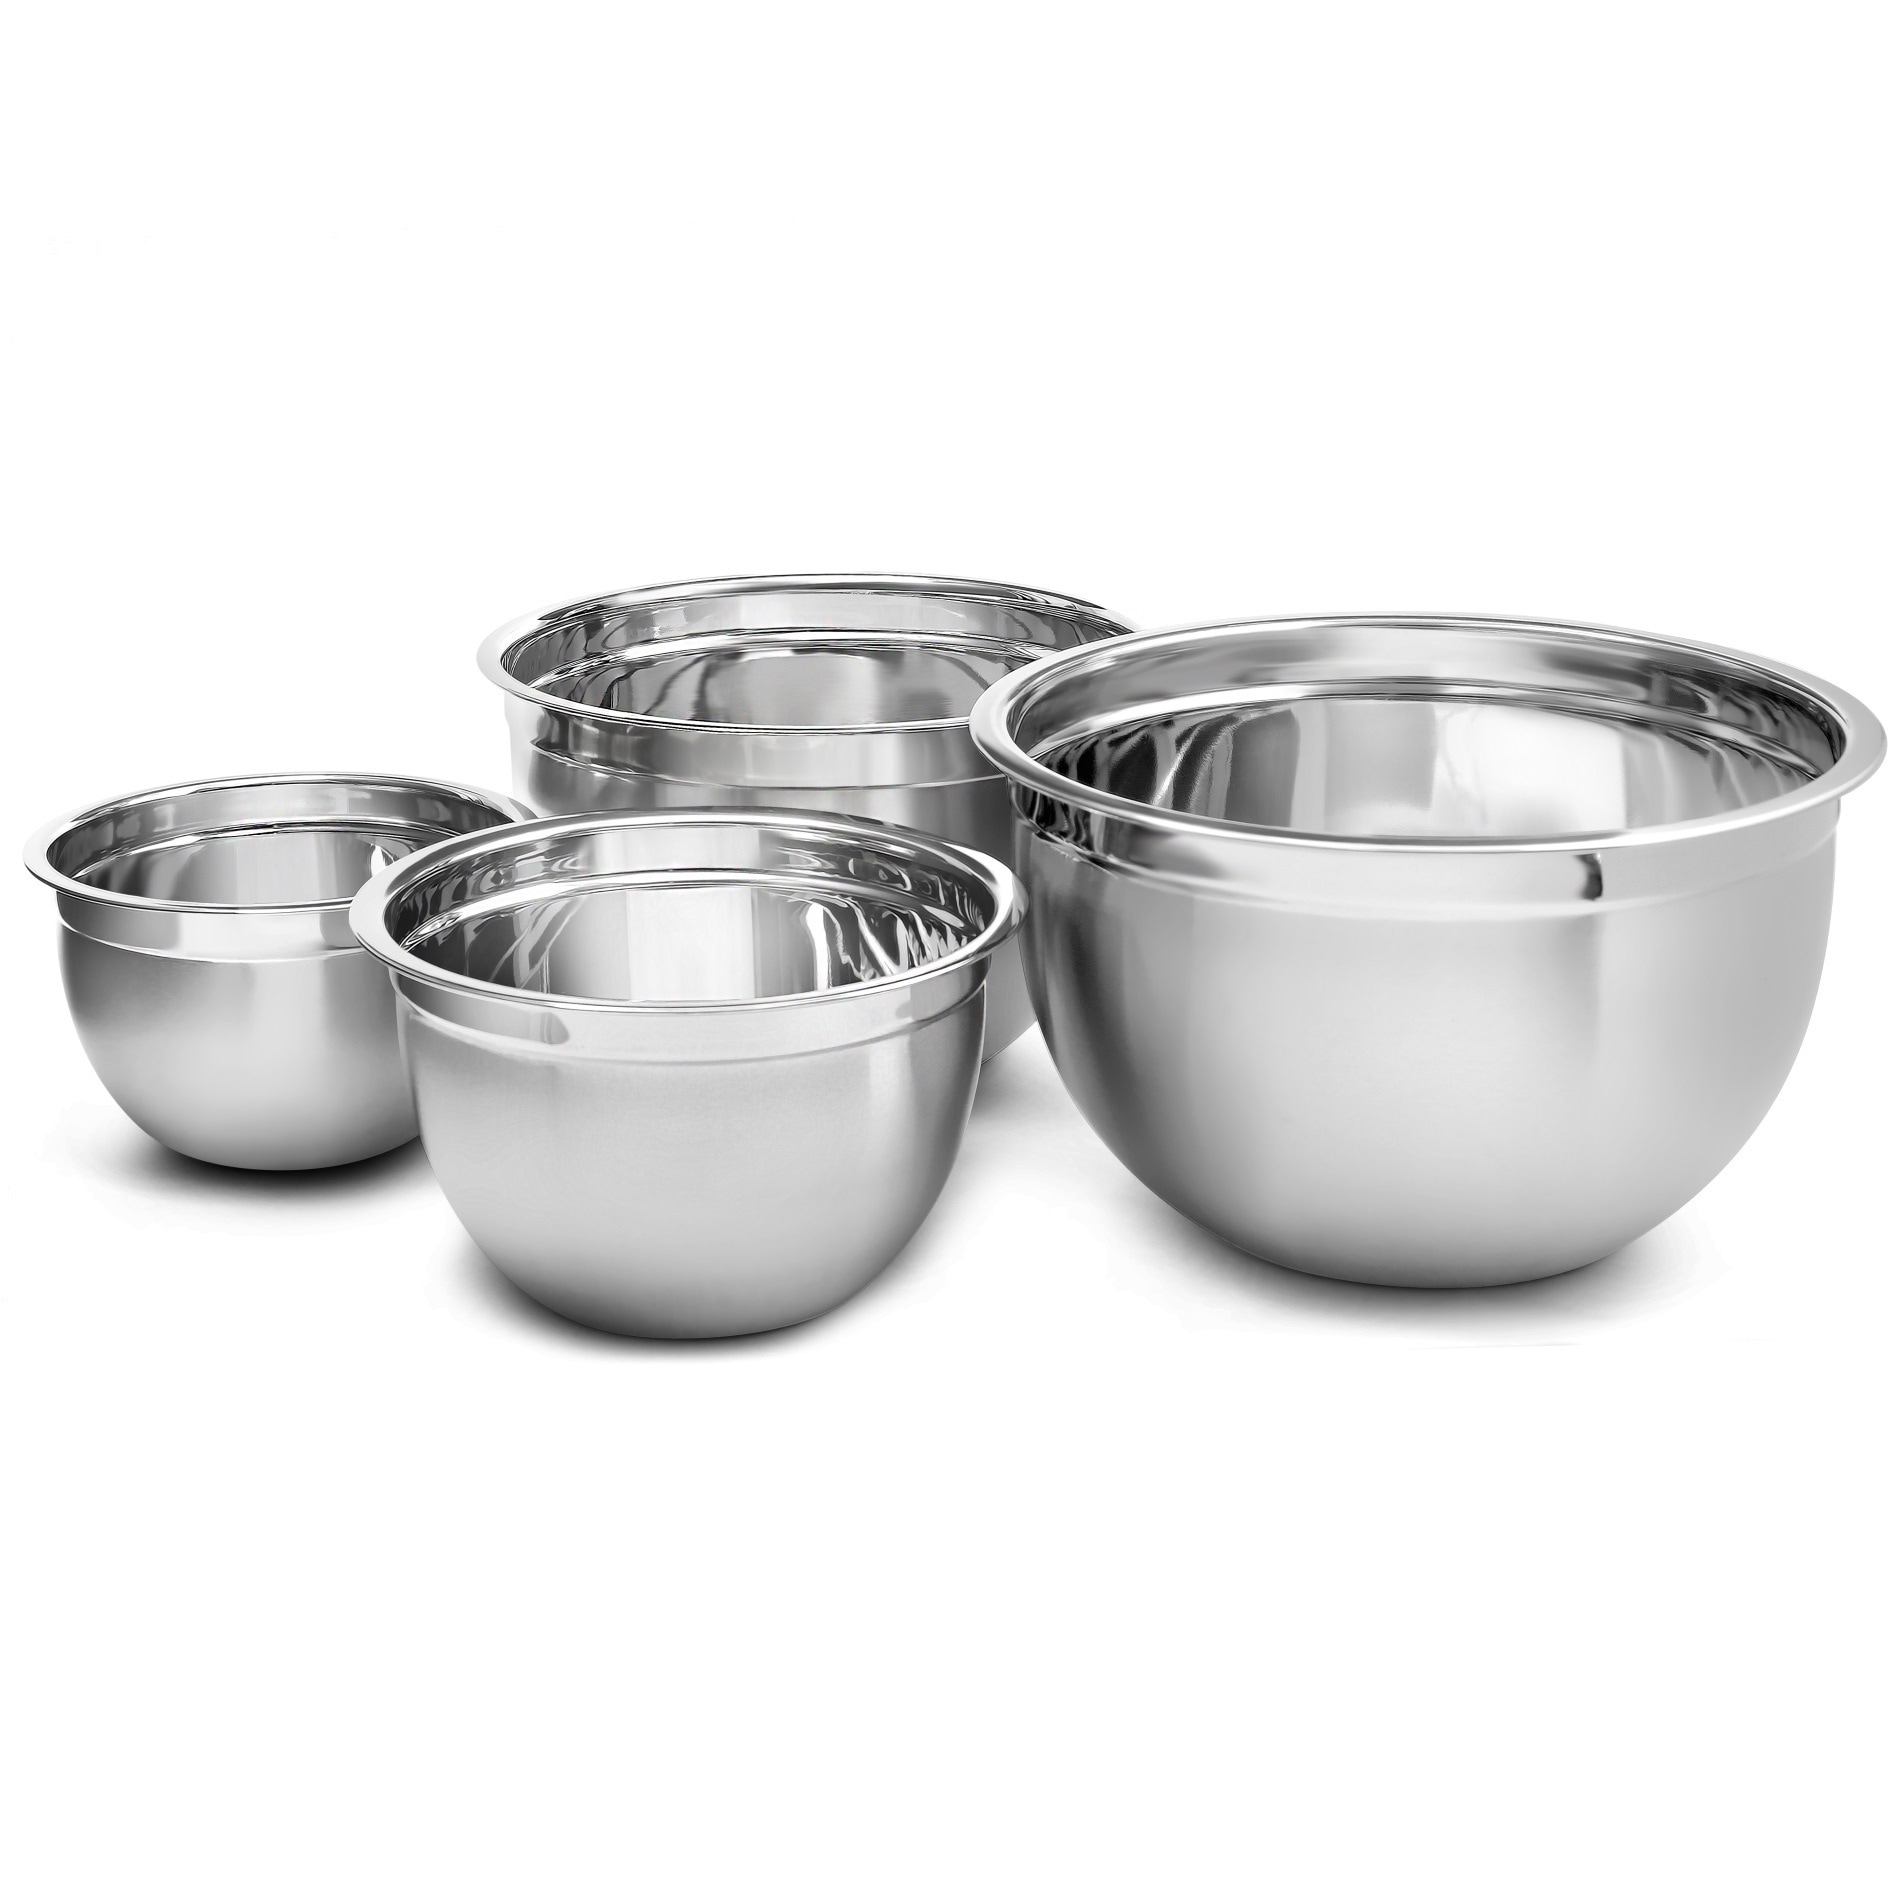 https://ak1.ostkcdn.com/images/products/13789013/YBM-Home-Deep-Professional-Heavy-Duty-Quality-Stainless-Steel-Mixing-Bowls-Set-of-4-9f990121-f684-4754-bcdb-80d87def4431.jpg